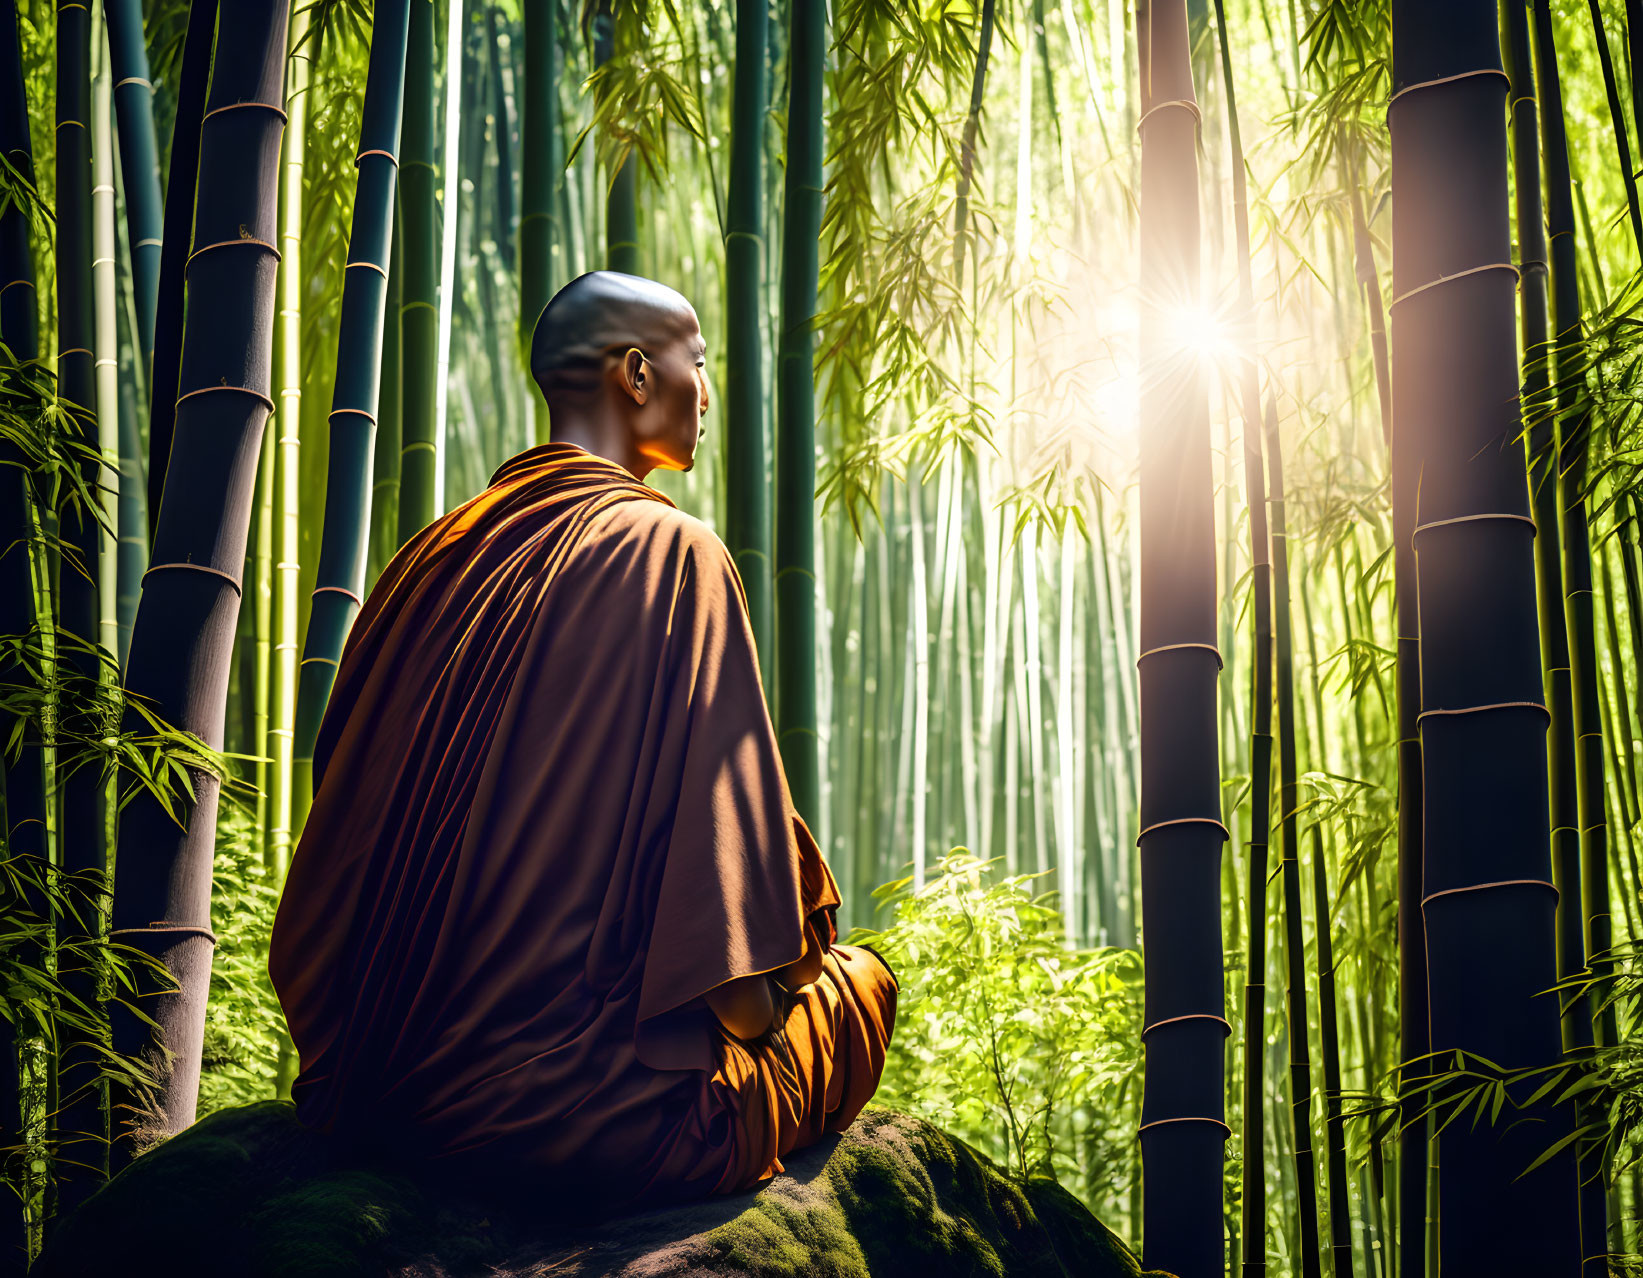 Monk Meditating in Orange Robes Amidst Bamboo Forest